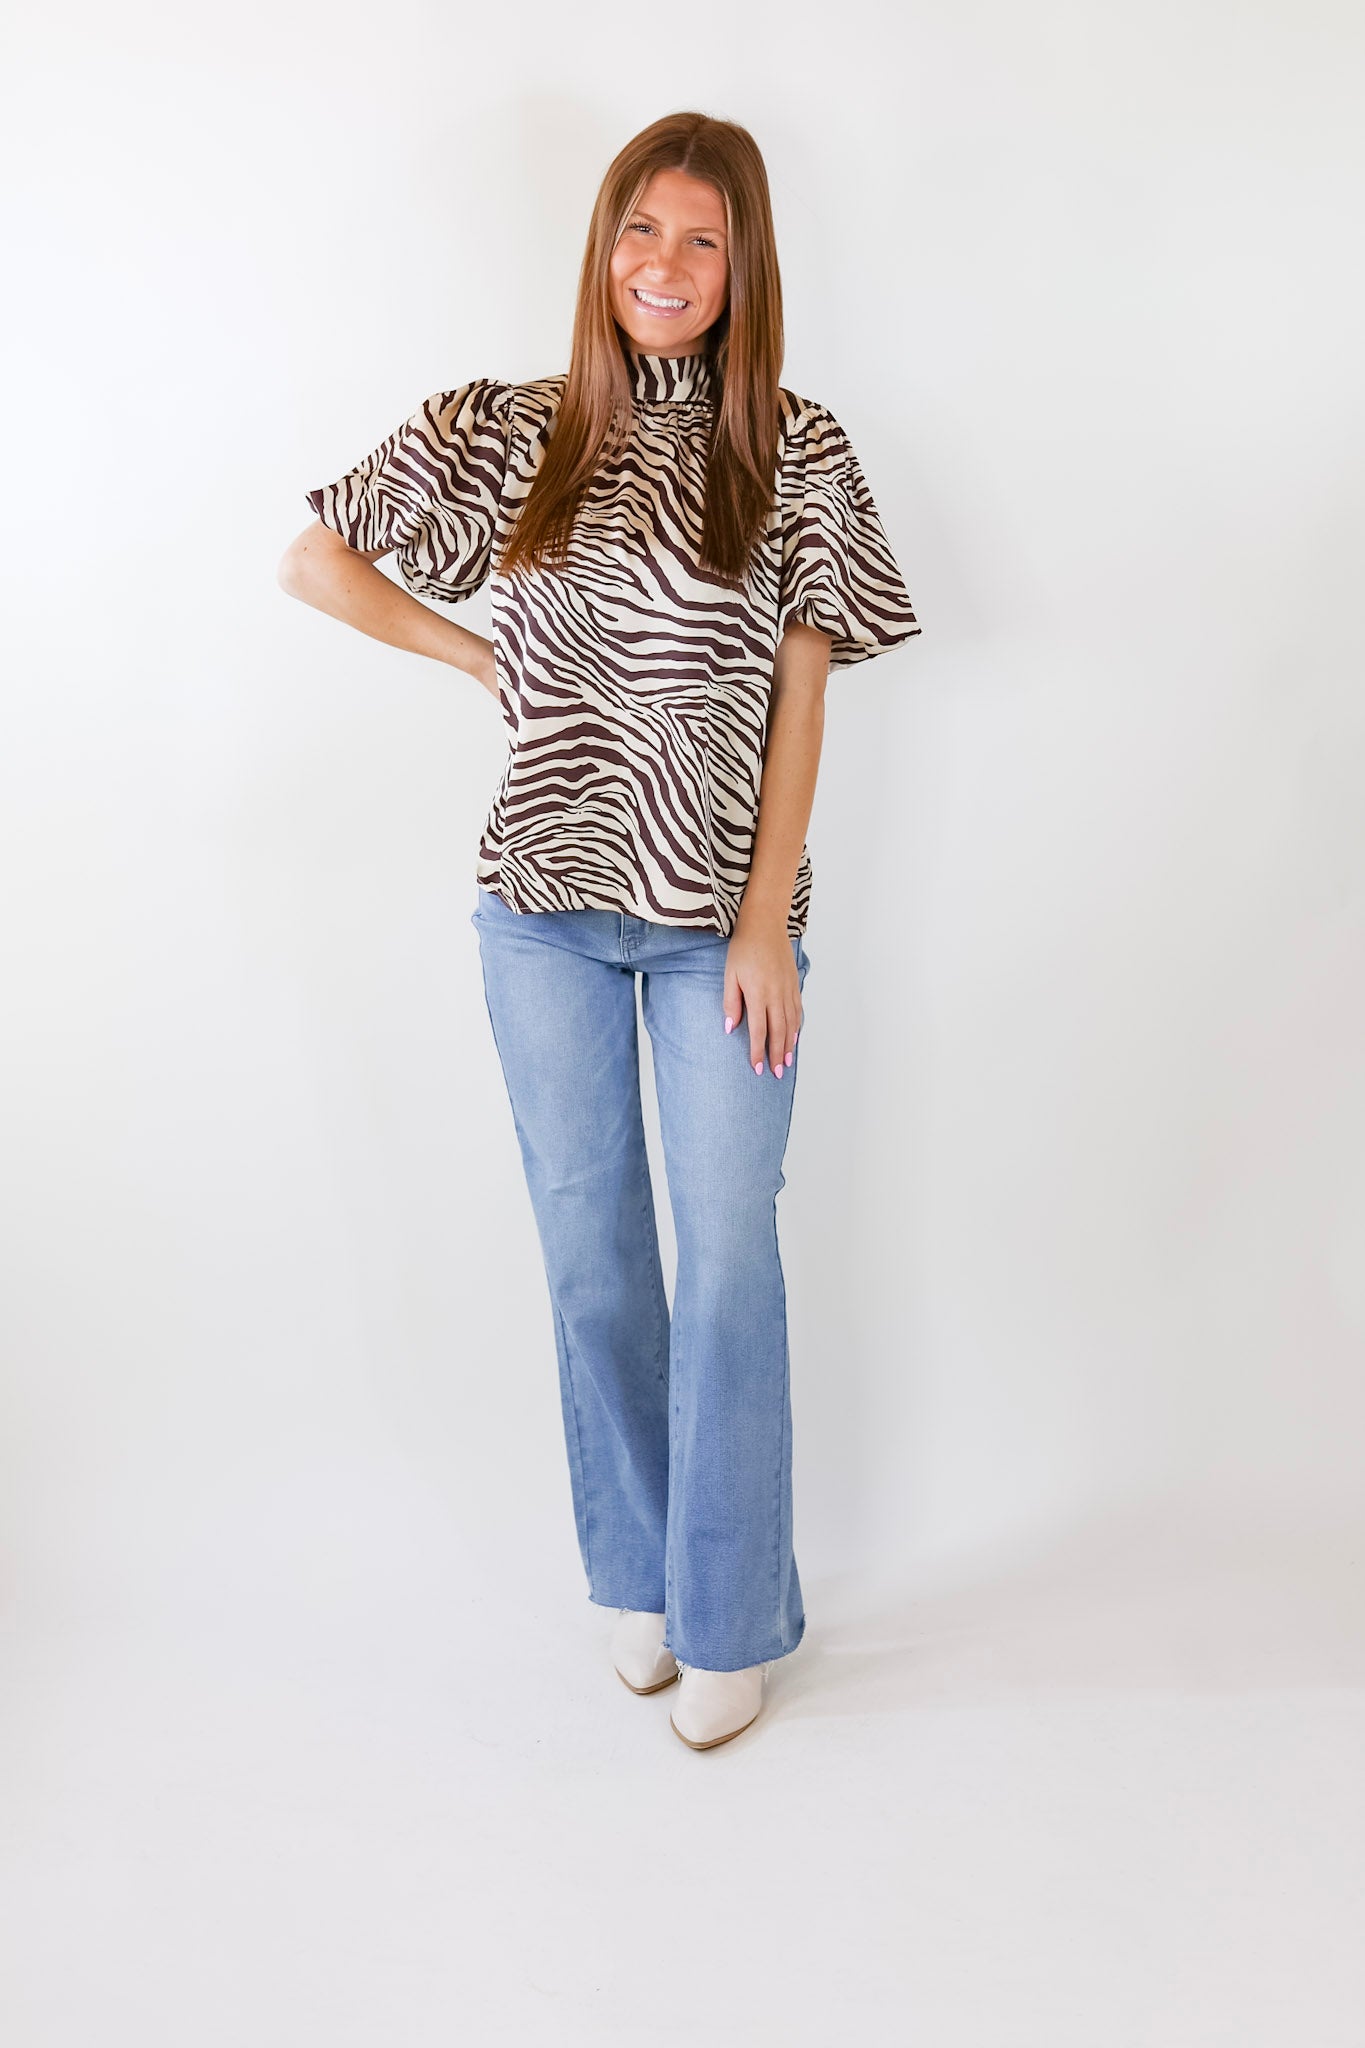 Rival Flair Zebra Print Top with Mock Neck in Chocolate Brown and Cream - Giddy Up Glamour Boutique